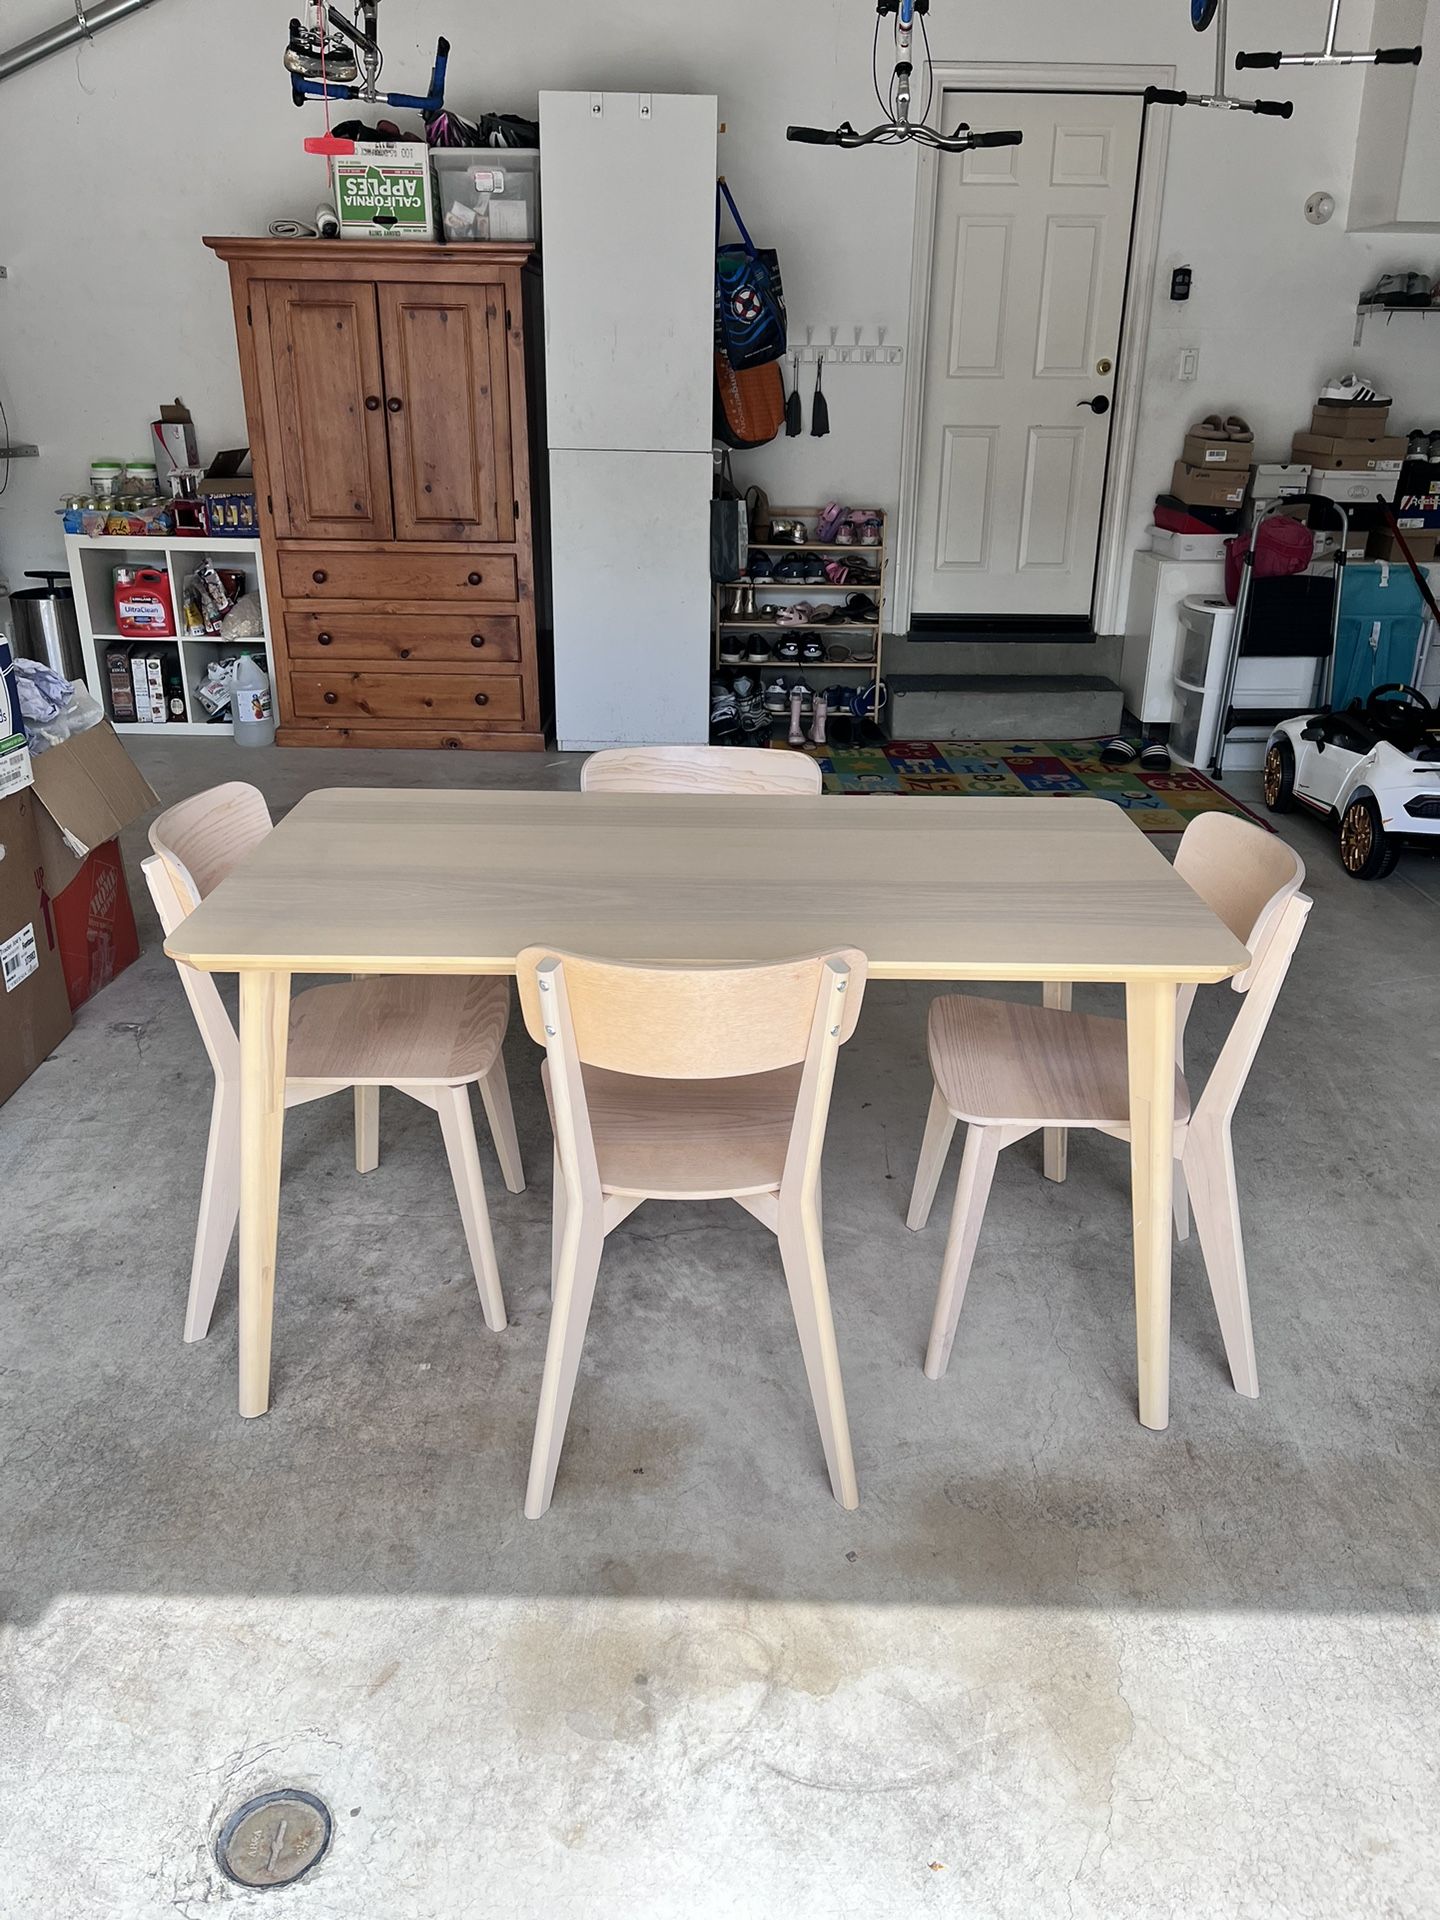 Ikea Wooden Table + Chairs - PRICED TO SELL FAST